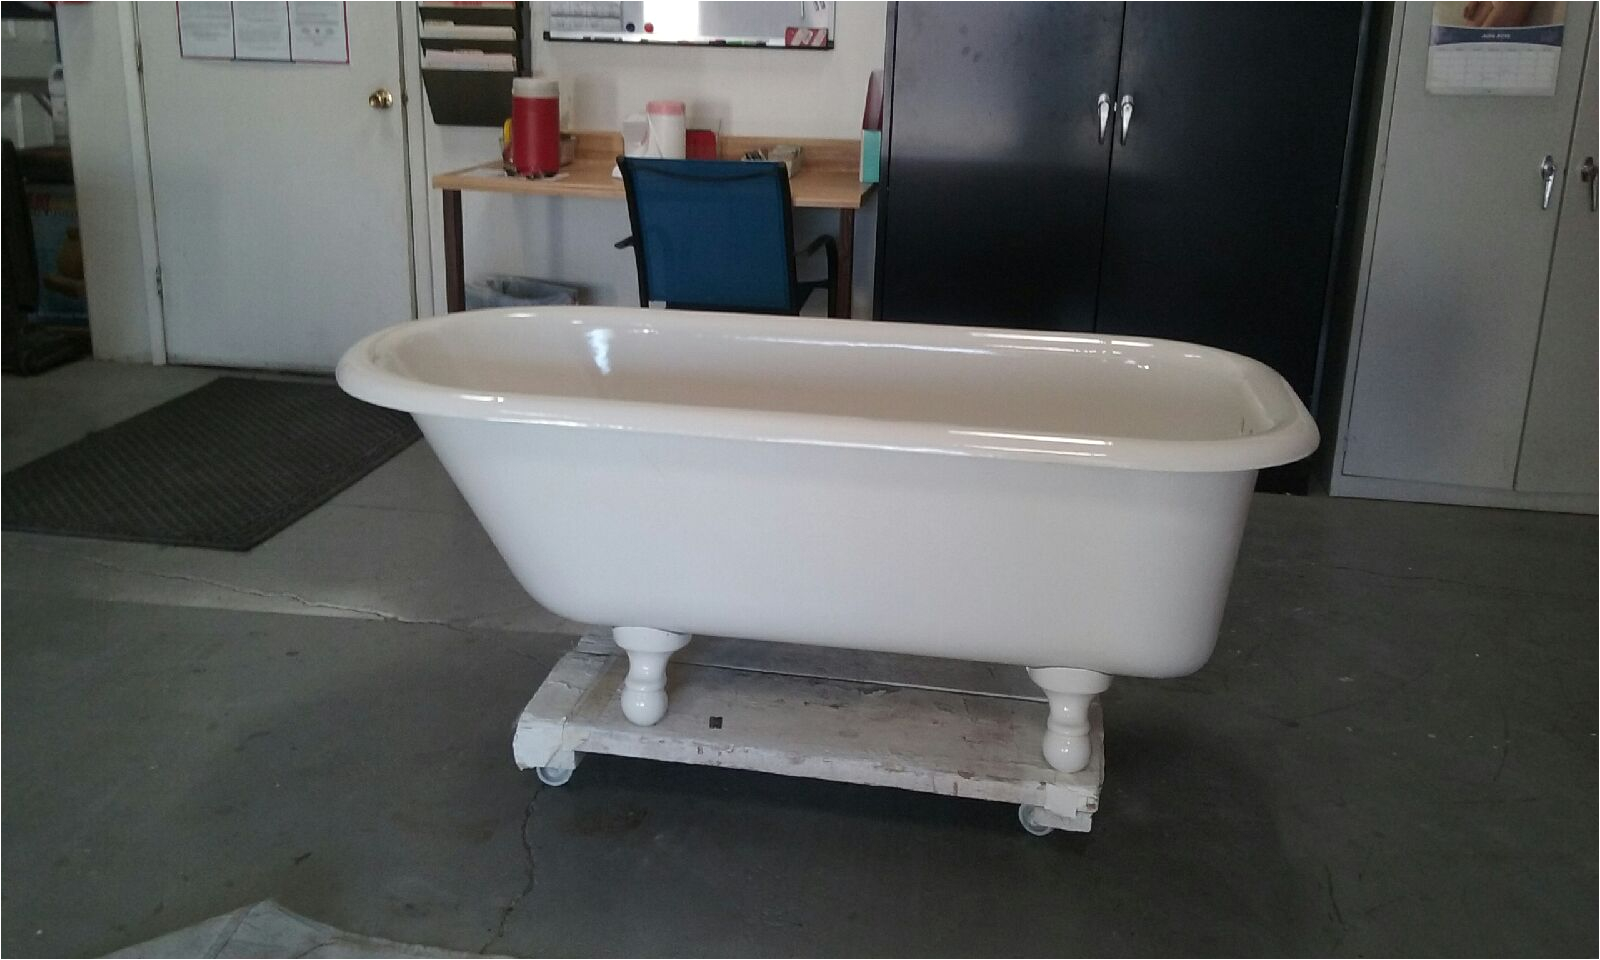 Porcelain Bathtubs for Sale Bathtub Refinishing In Phoenix area by todd S